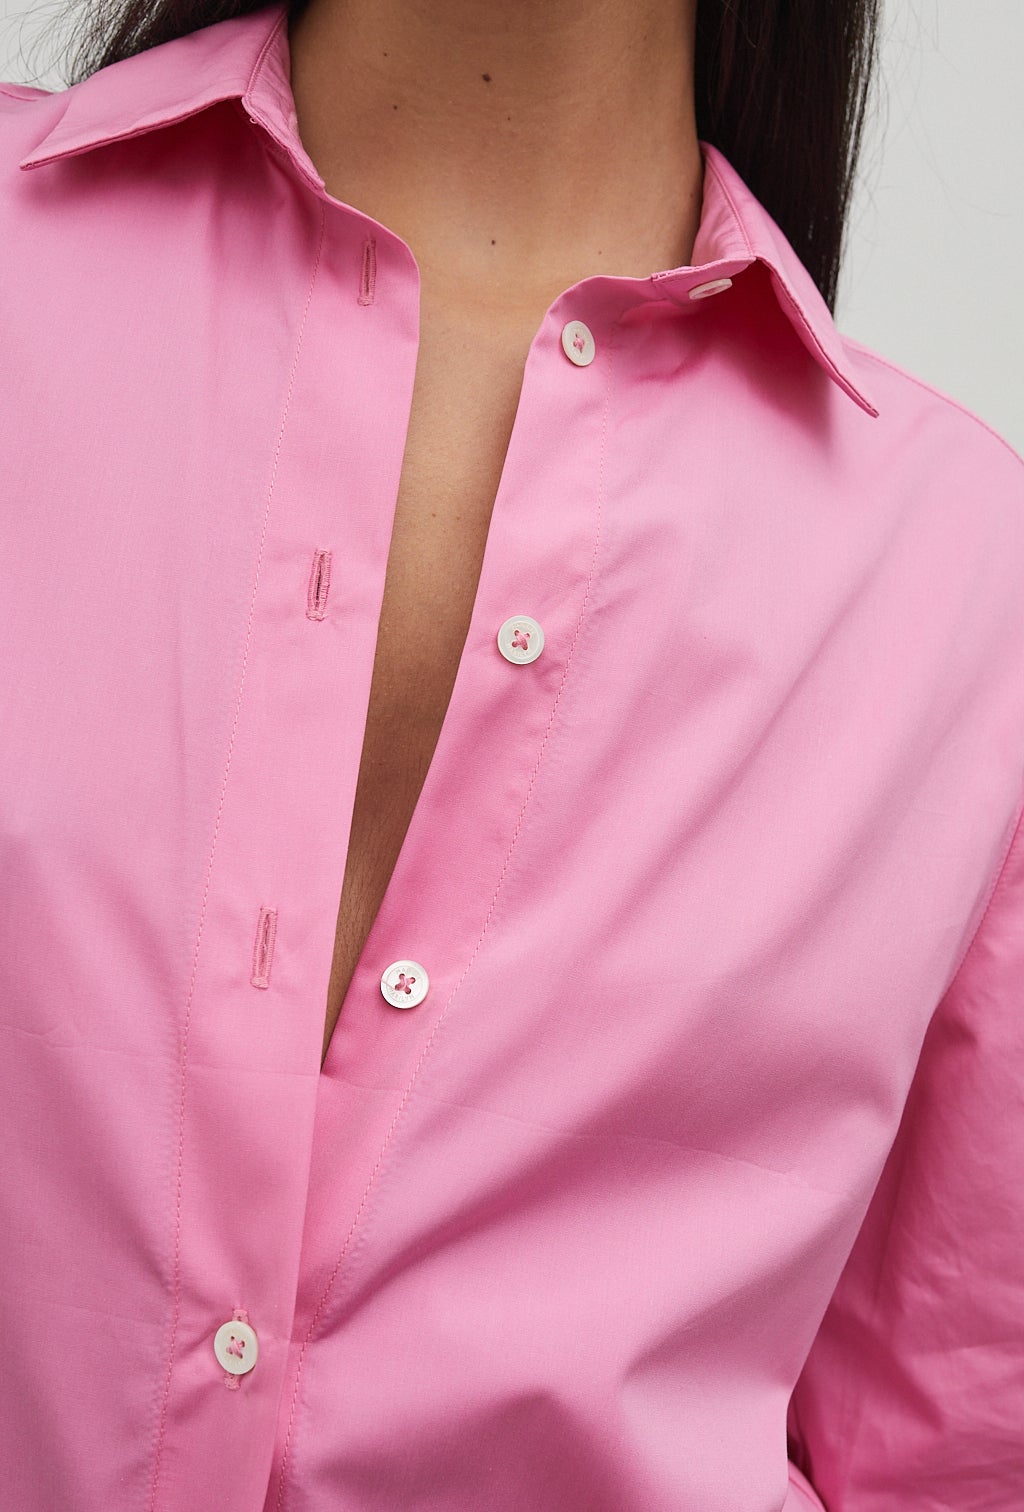 Signature Shirt in Pink | Maggie Marilyn